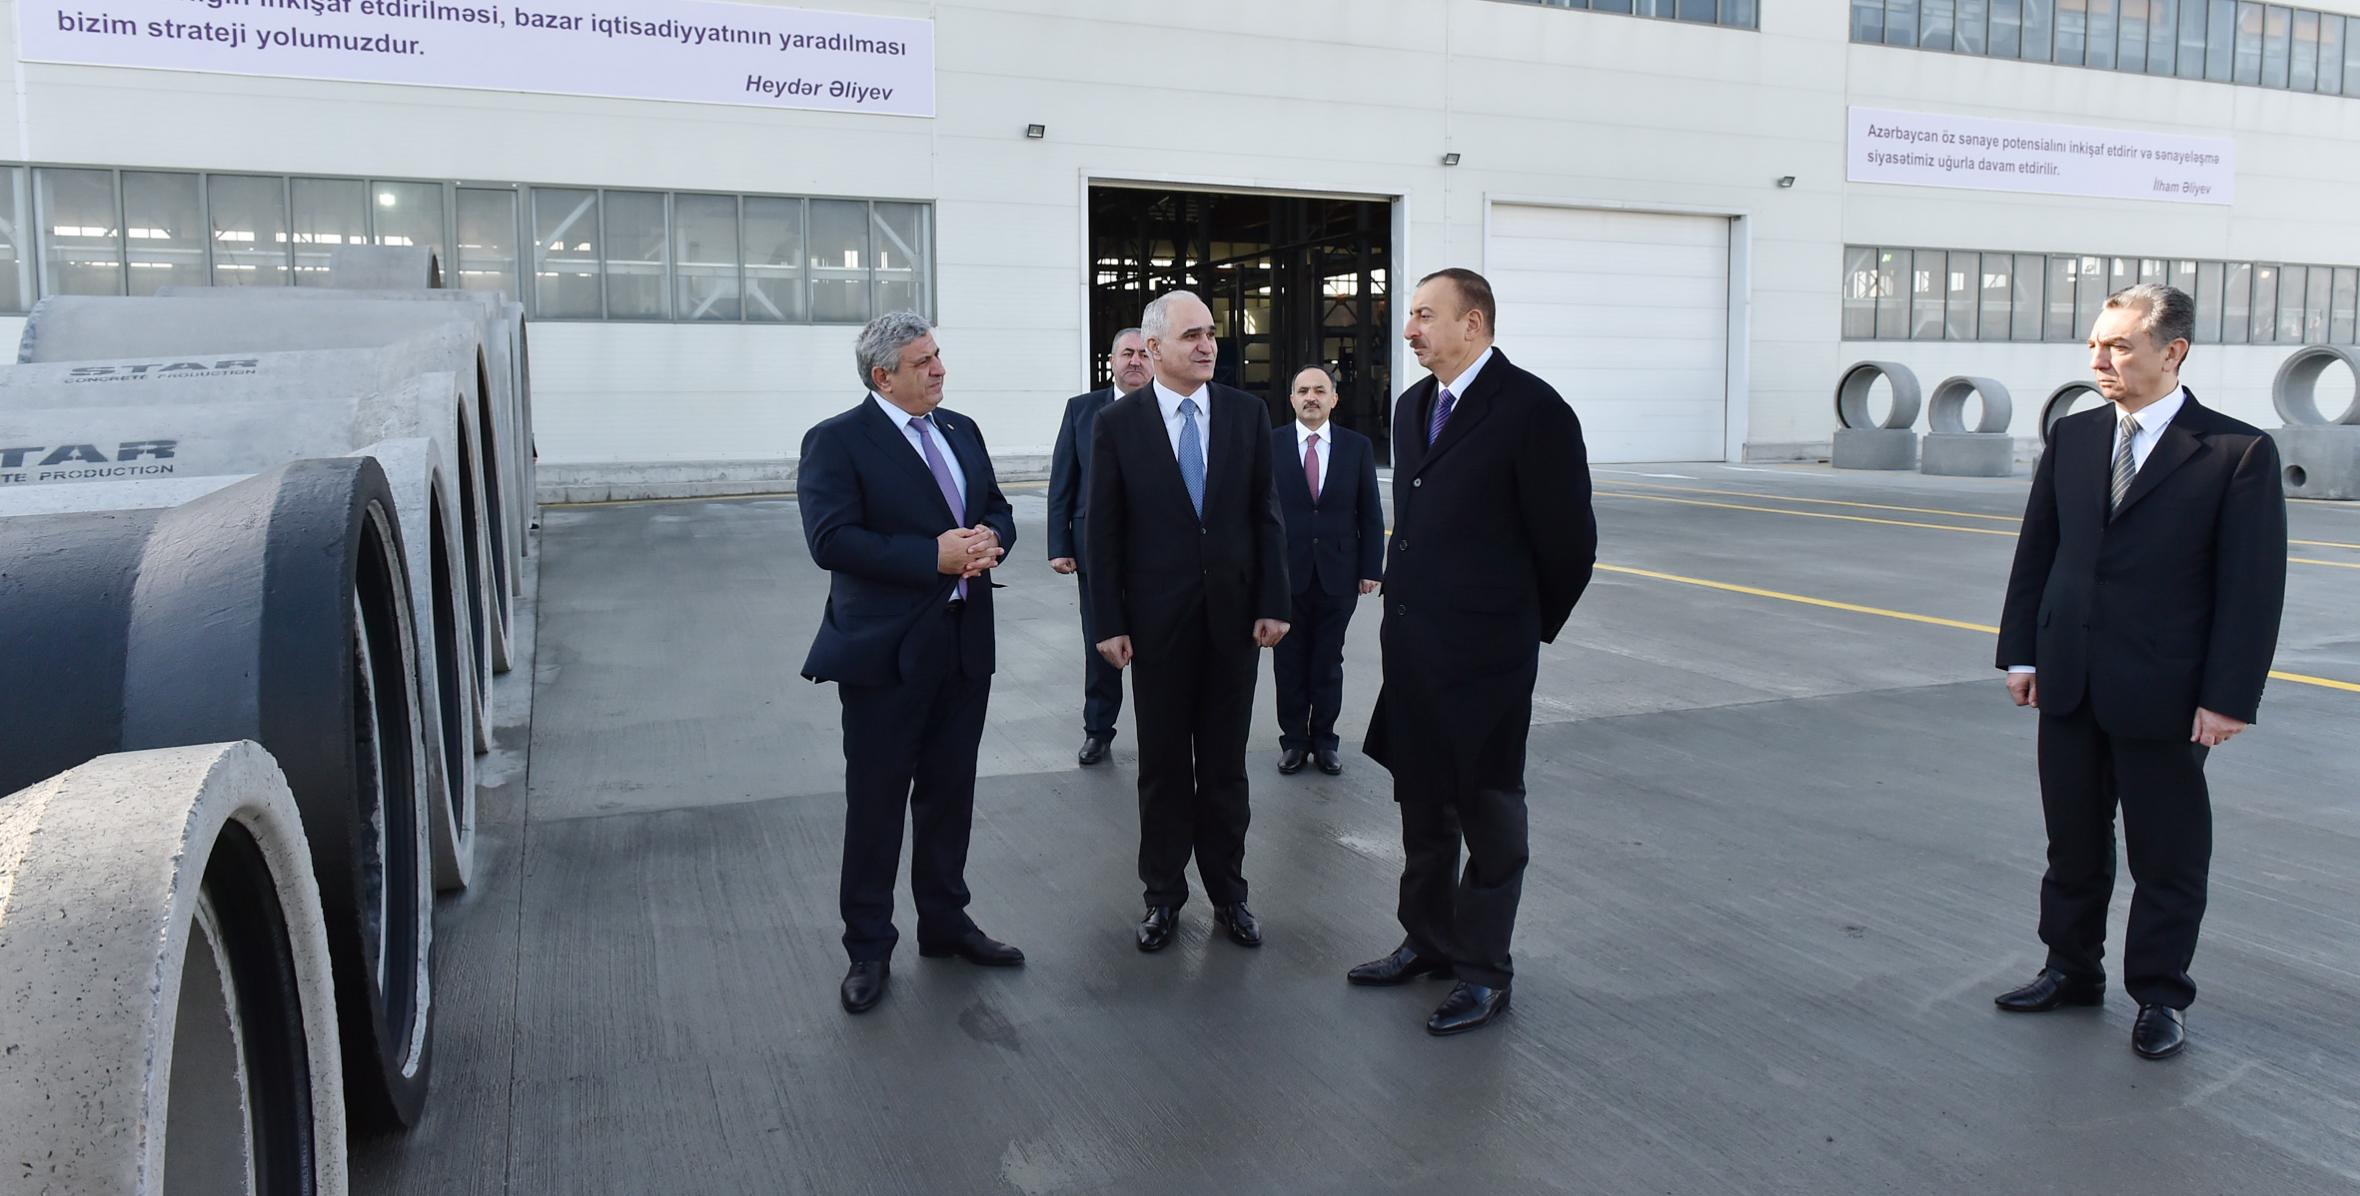 Ilham Aliyev attended the opening of a concrete plant in Sumgayit